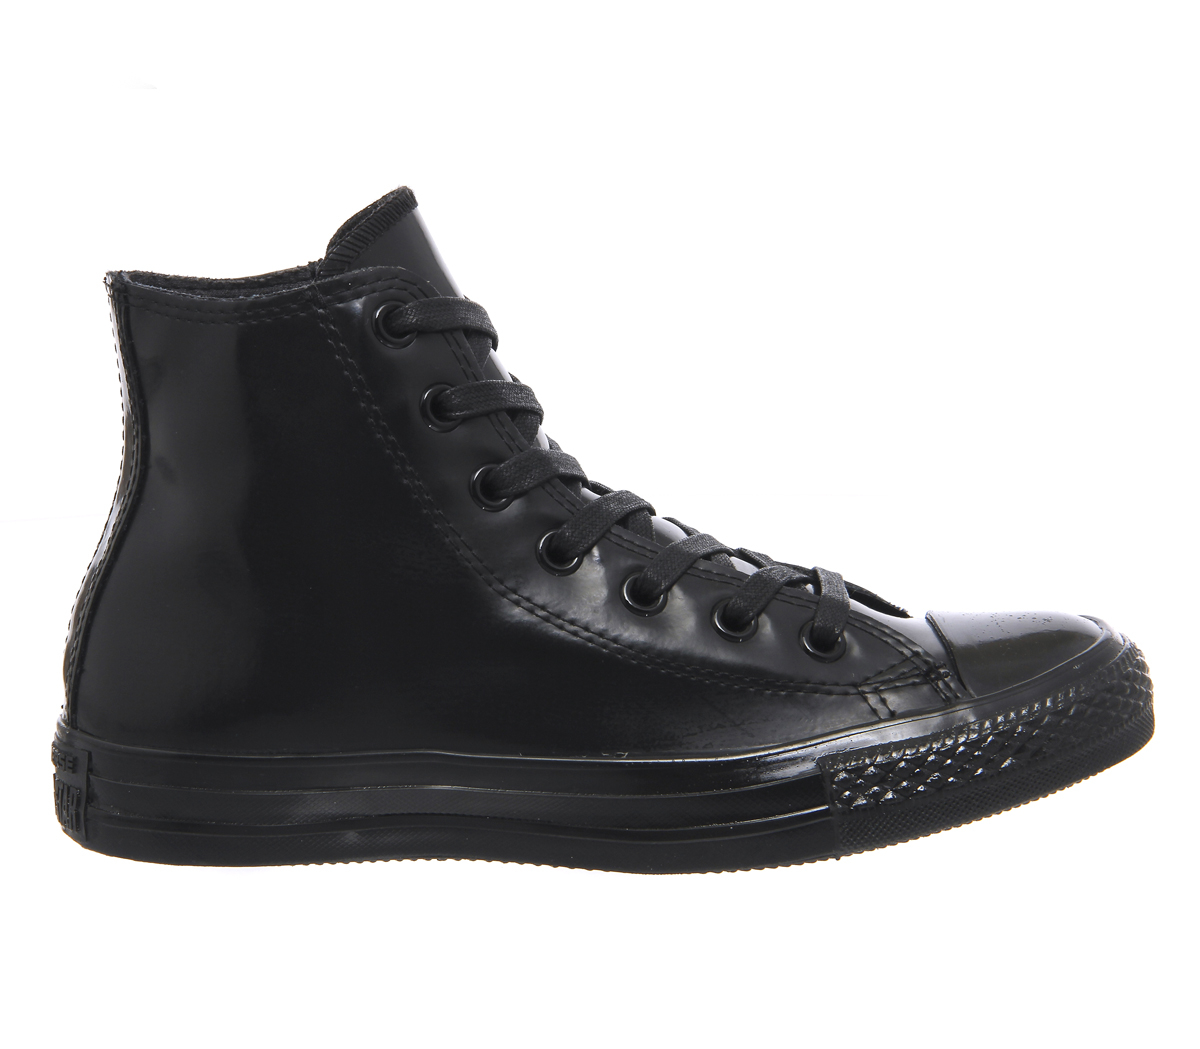 Converse High-tops & Sneakers in Black | Lyst